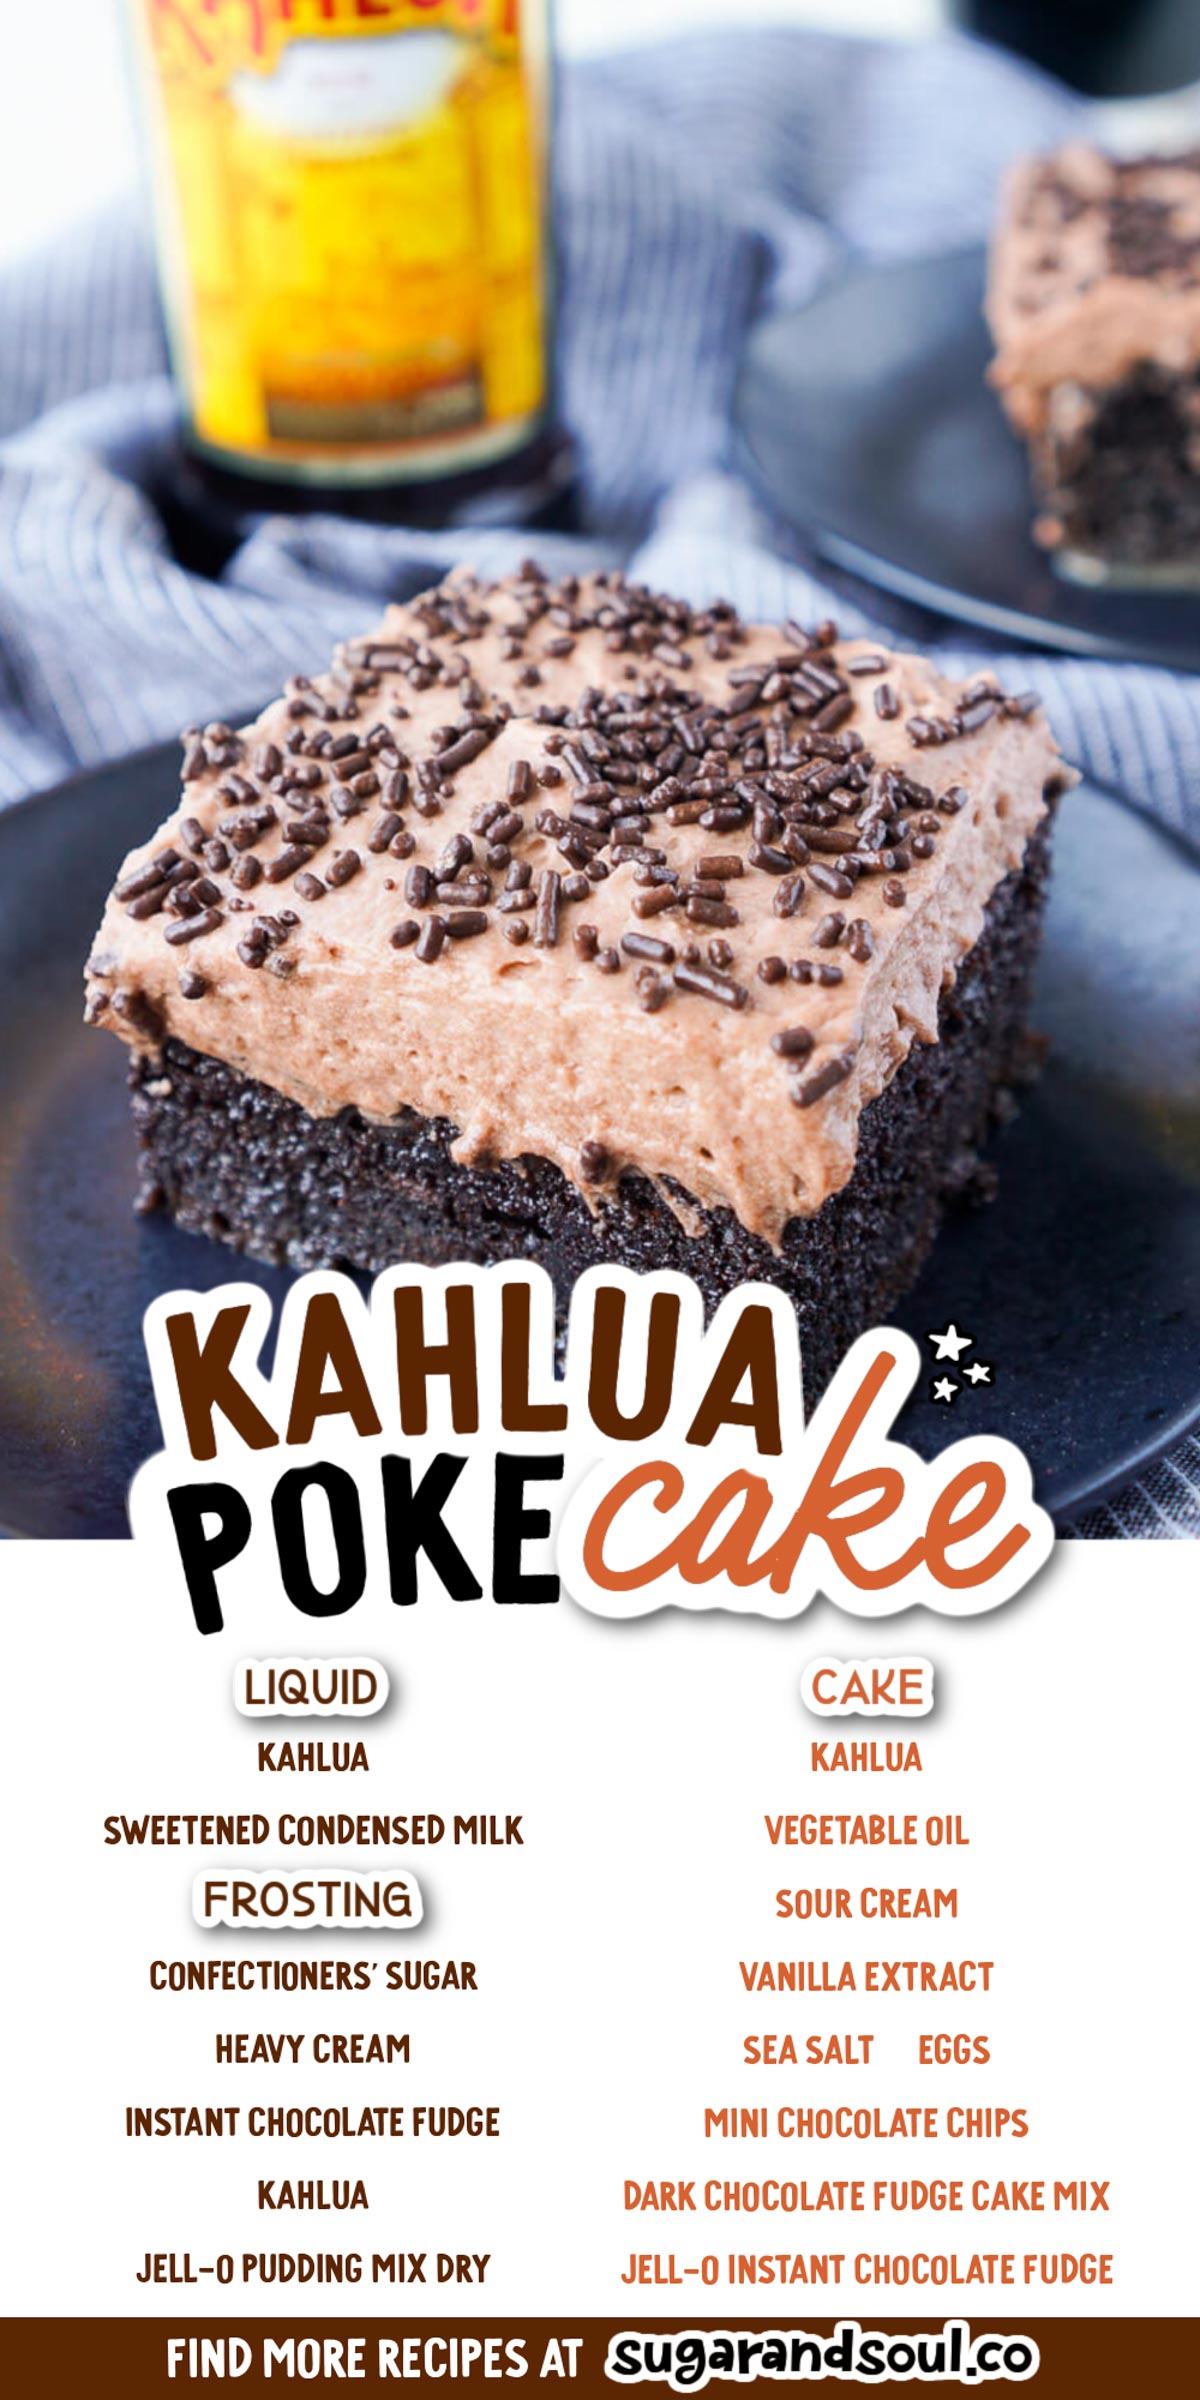 This Kahlua Chocolate Poke Cake is a chocolate cake that's baked in, soaked in, and frosted with Kahlua. It's the ultimate boozy dessert! via @sugarandsoulco